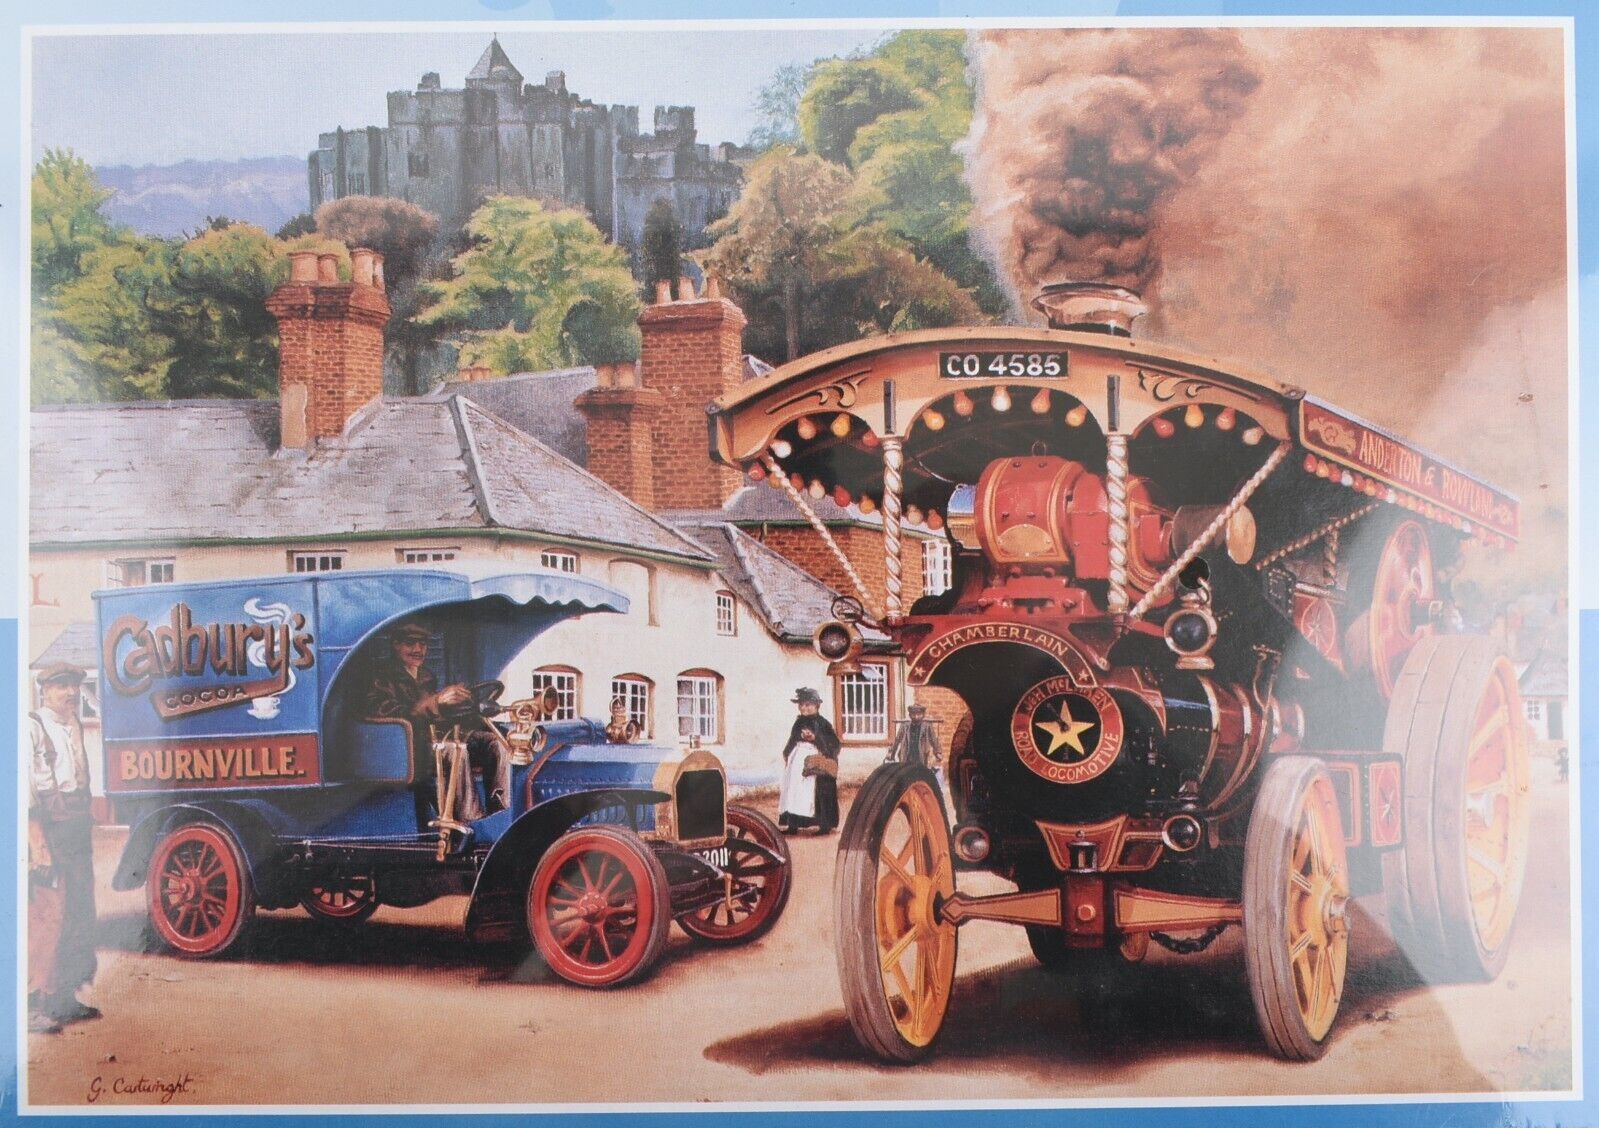 KING Steam Loco (by Gary Cartwright) 1000pcs Jigsaw Puzzle